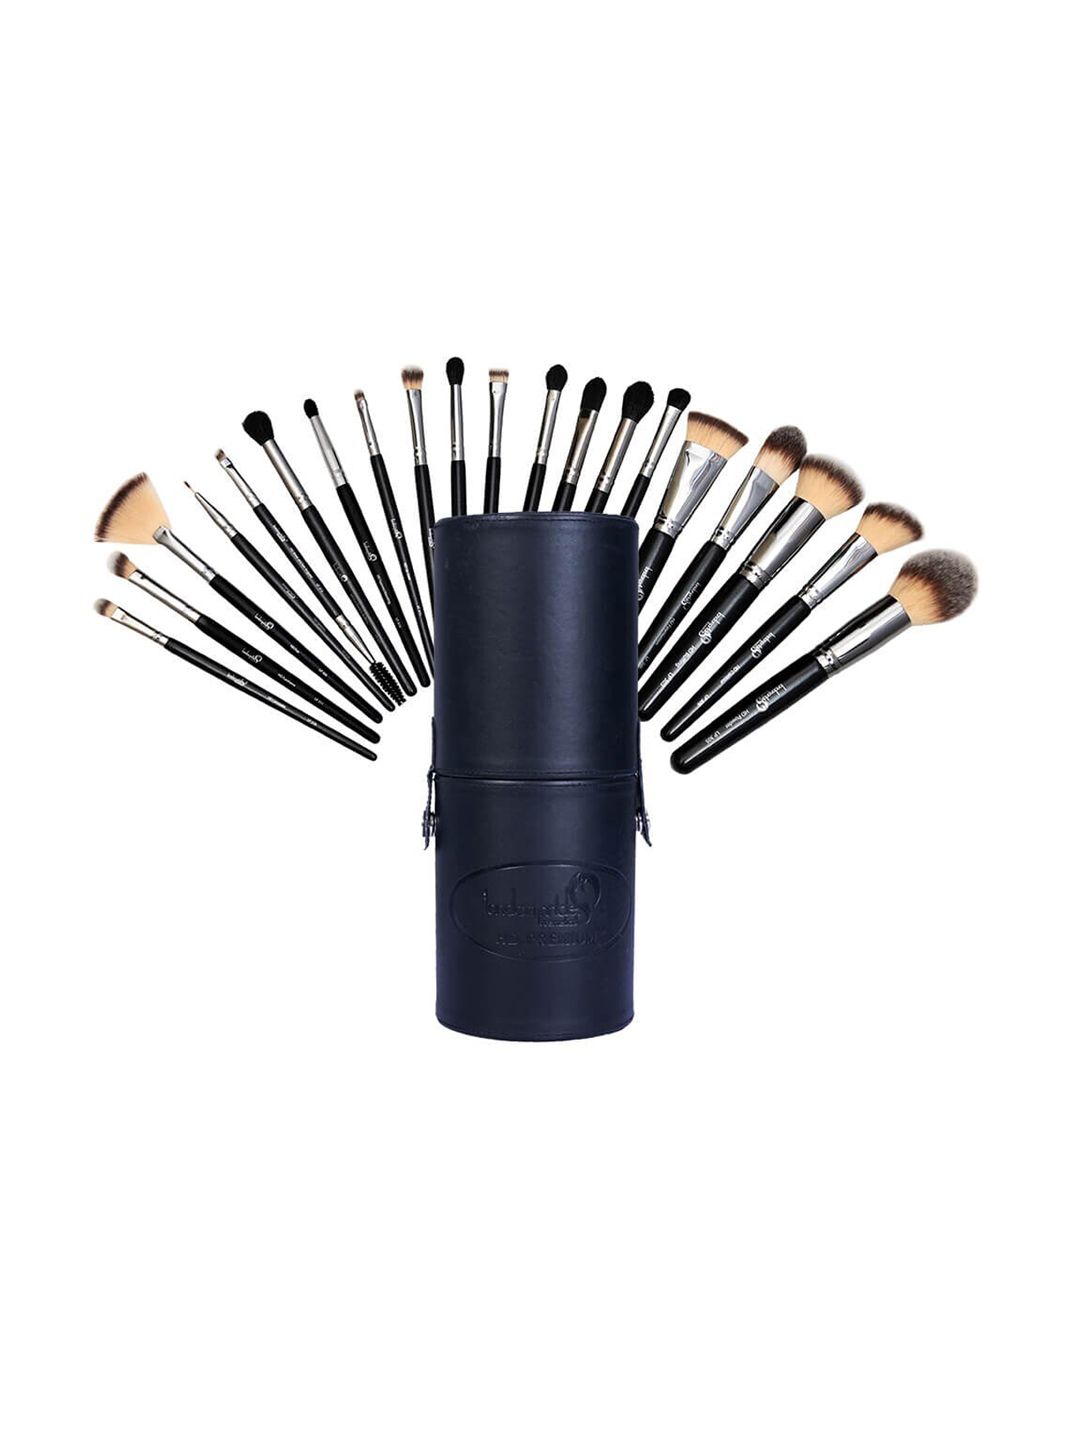 london pride cosmetics Set of 20 HD Professional Makeup Brushes Price in India